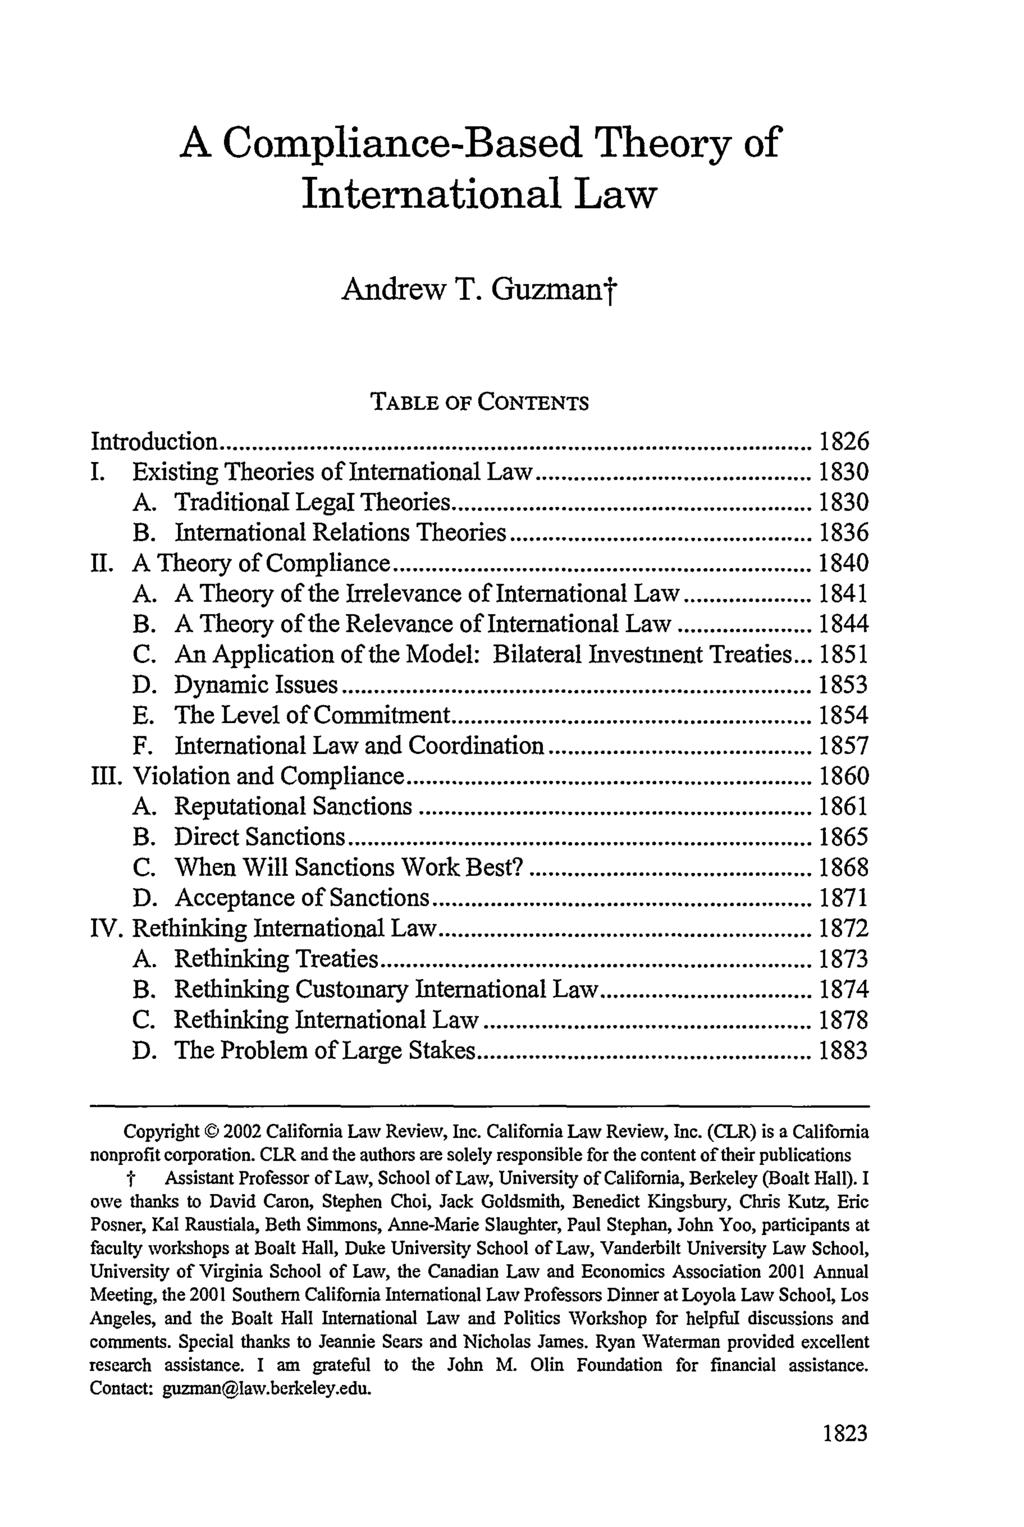 A Compliance-Based Theory of International Law Andrew T. Guzmant TABLE OF CONTENTS Introduction... 1826 I. Existing Theories of International Law... 1830 A. Traditional Legal Theories... 1830 B.